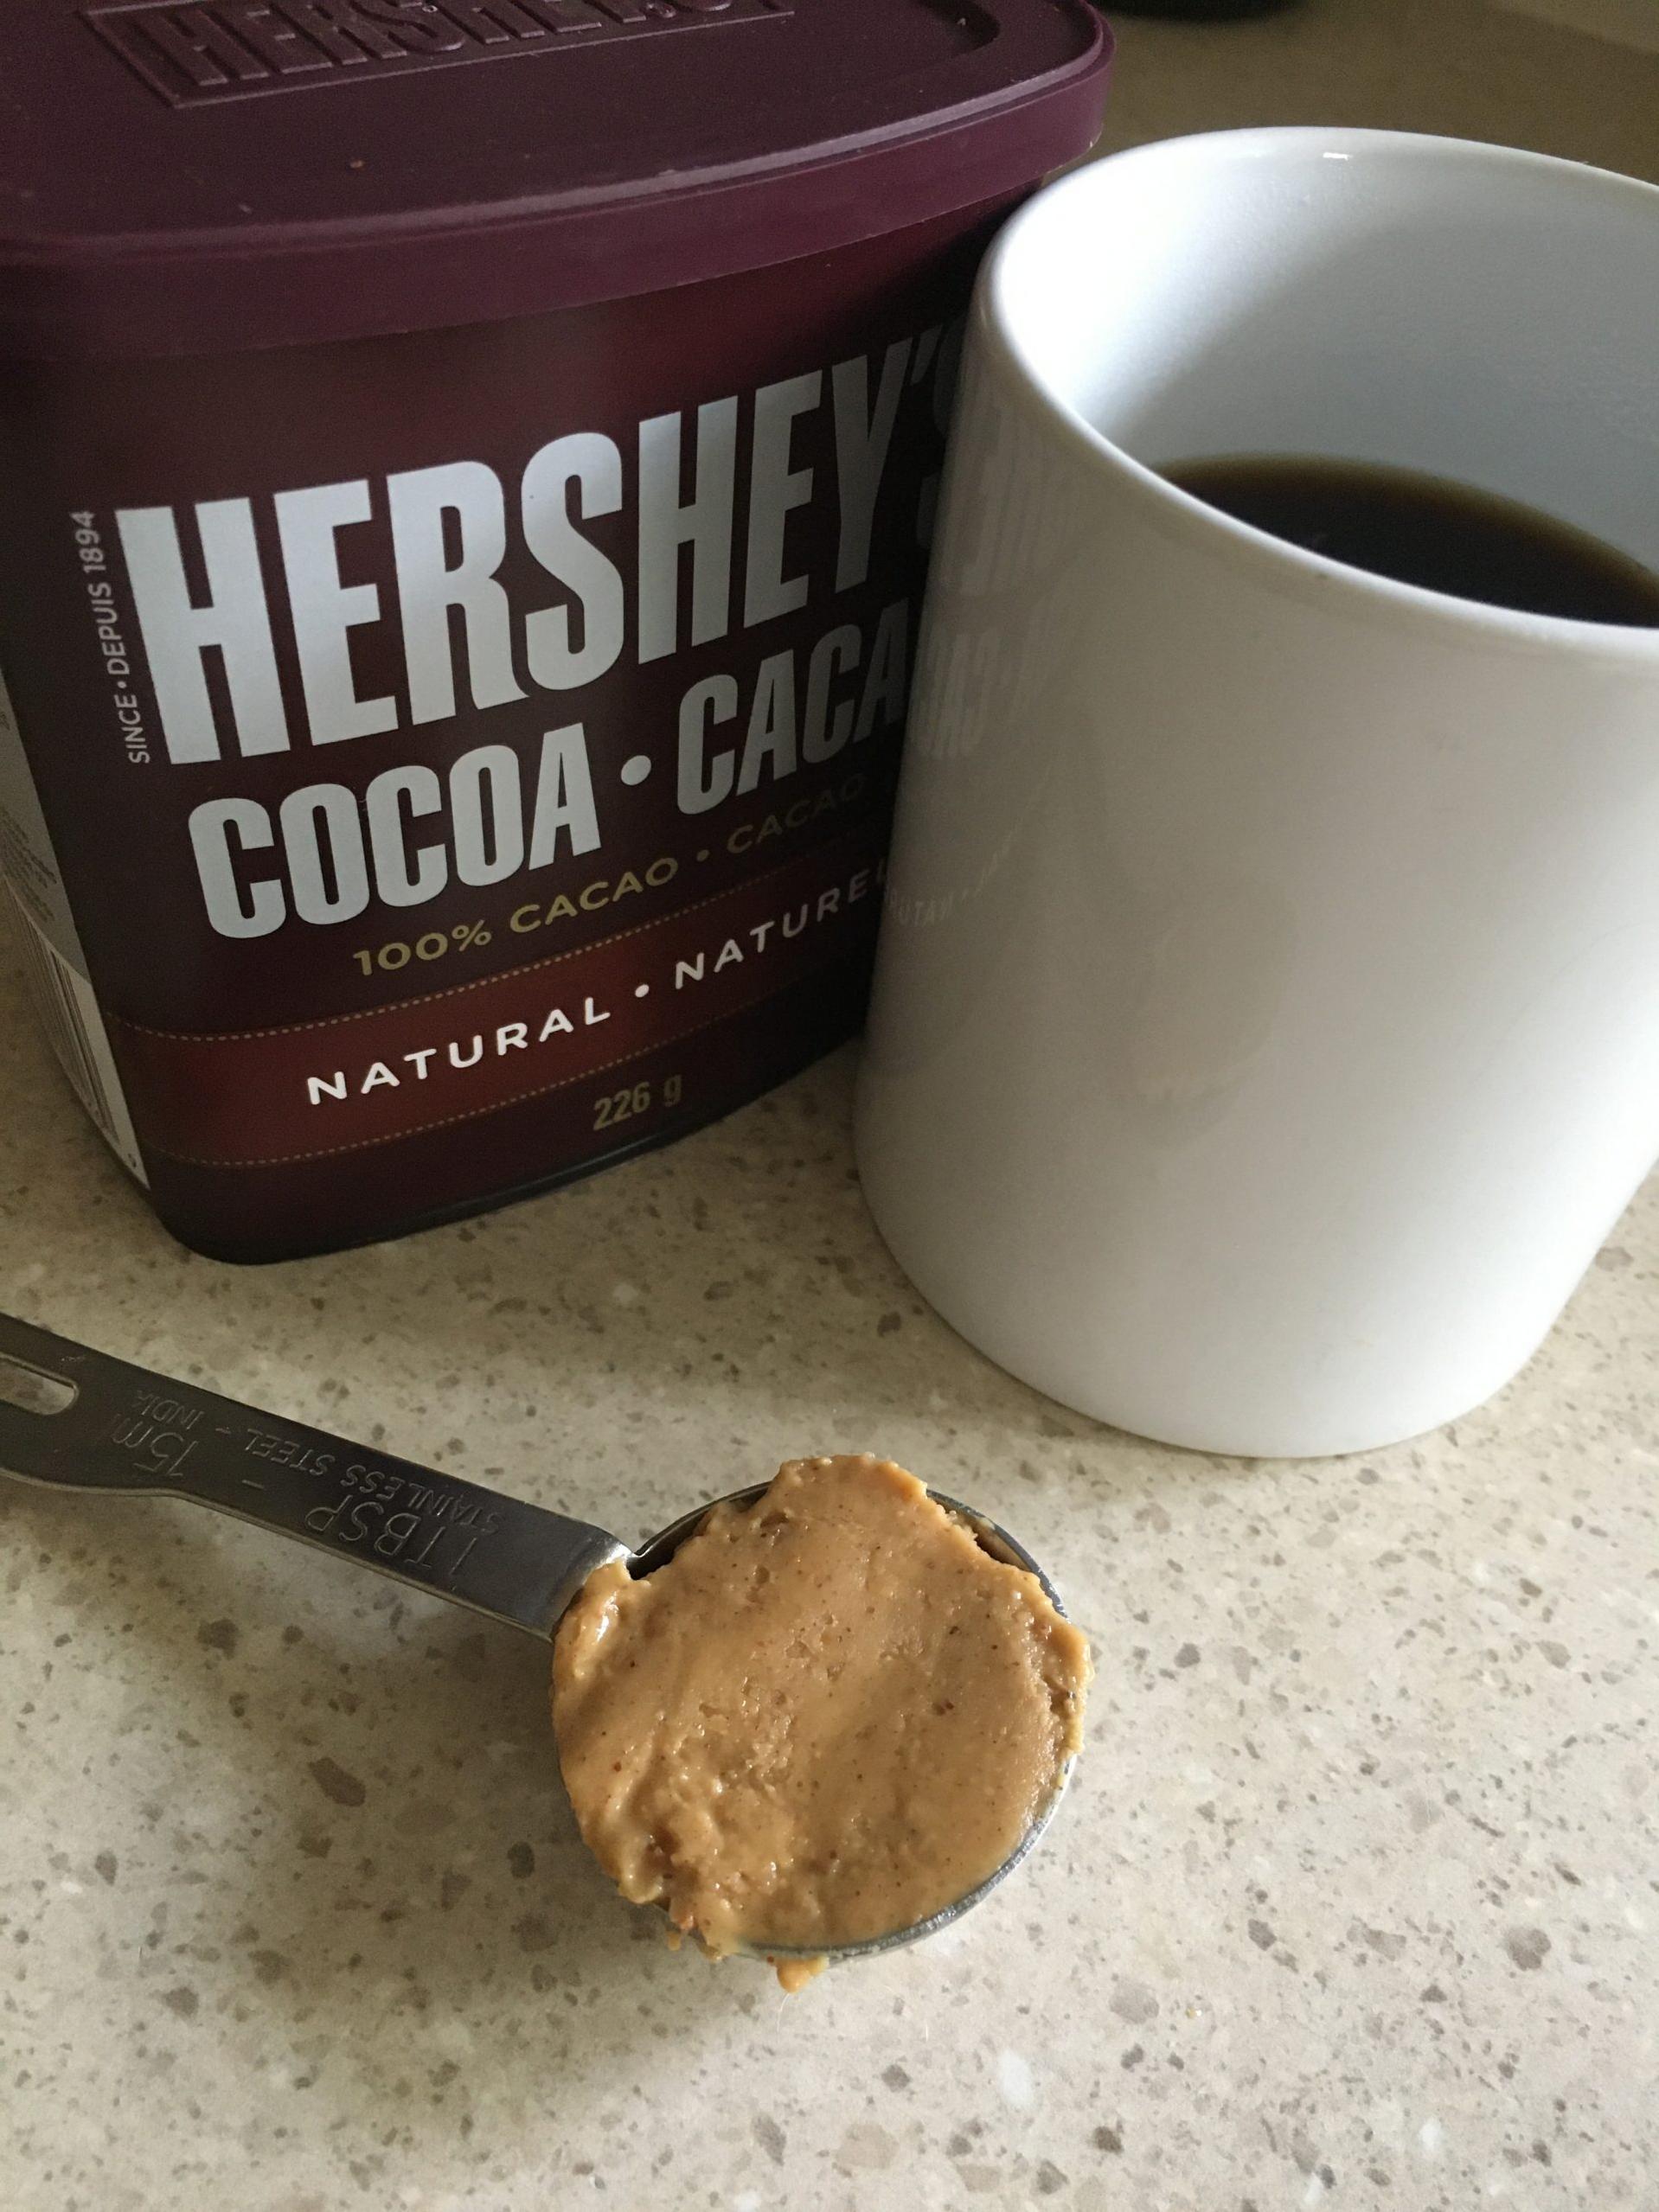  Turn your regular coffee into a decadent treat with this easy recipe